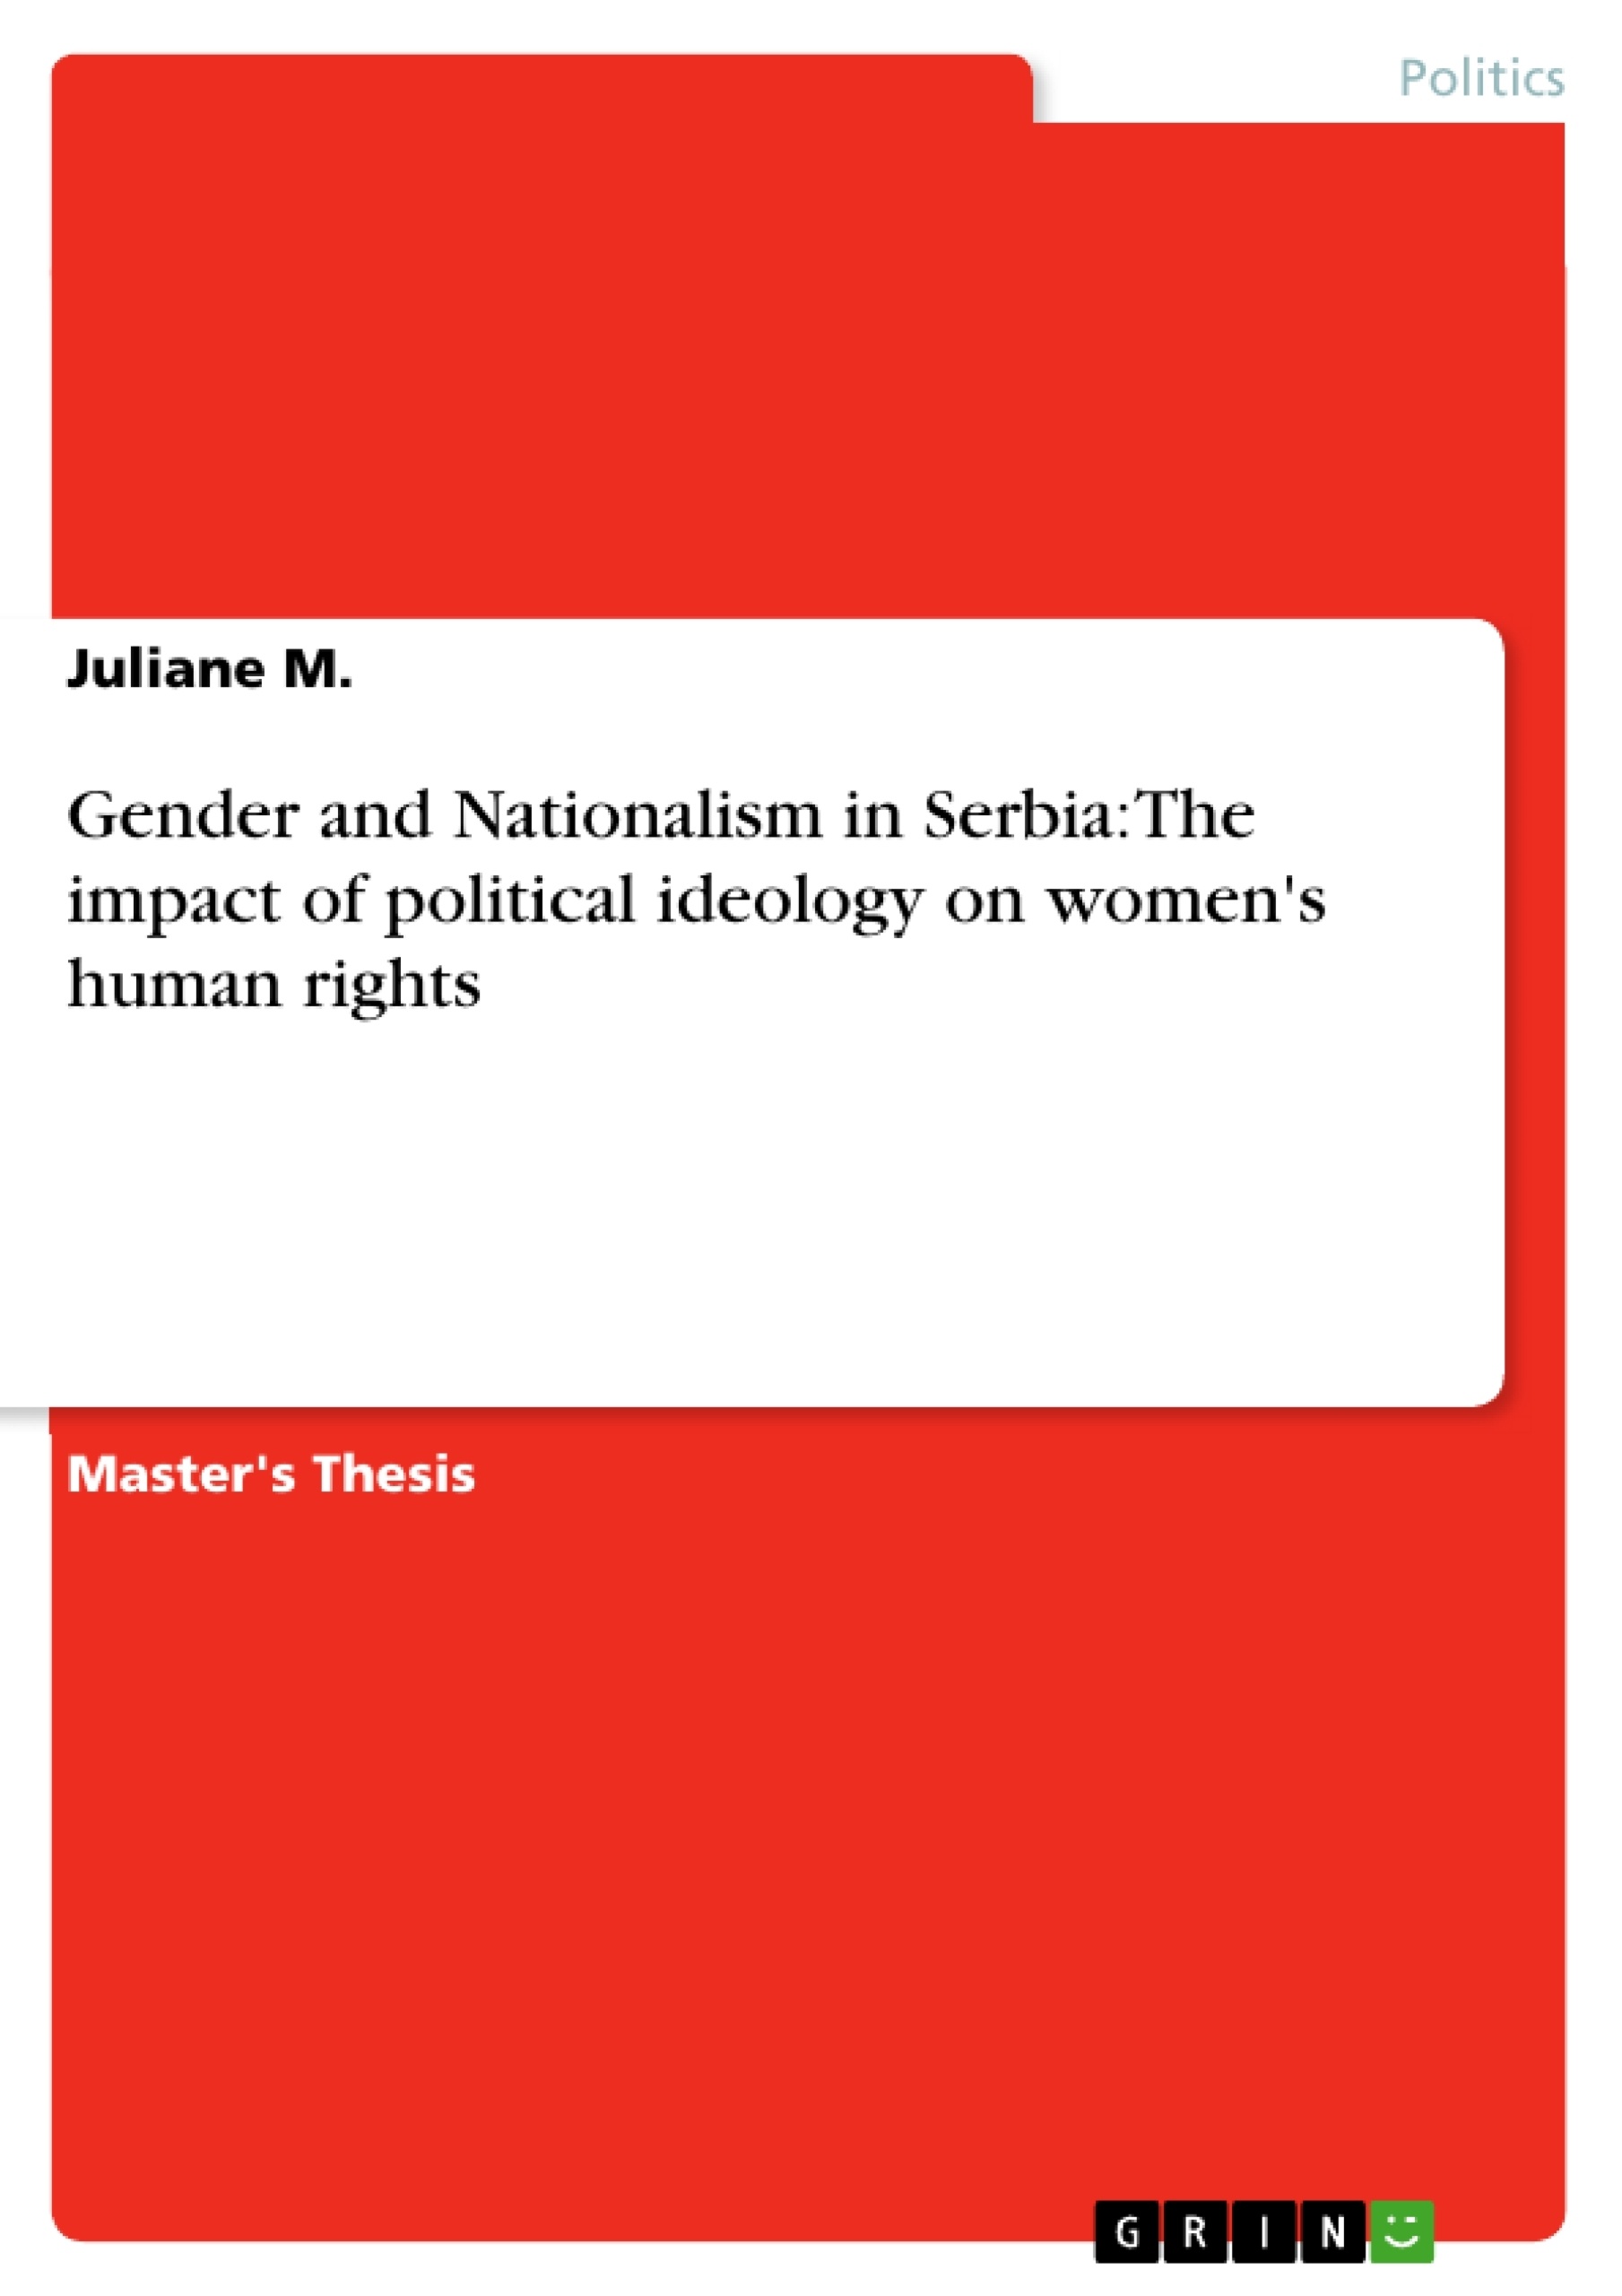 Título: Gender and Nationalism in Serbia: The impact of political ideology on women's human rights 